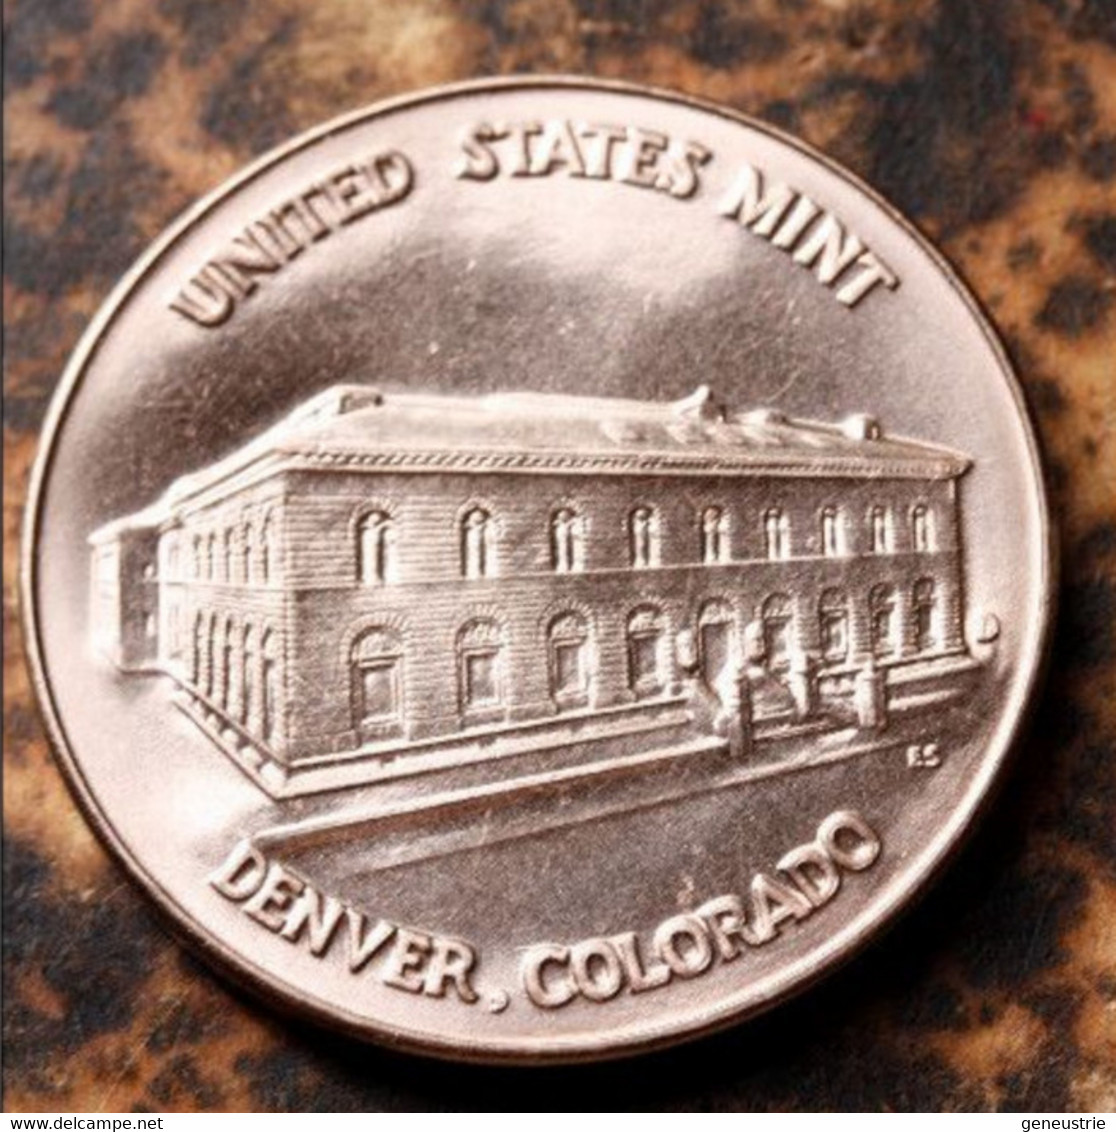 Beau Jeton "United States Mint - Denver Colorado / The Department Of The Treasury" United States Mint Token - Notgeld